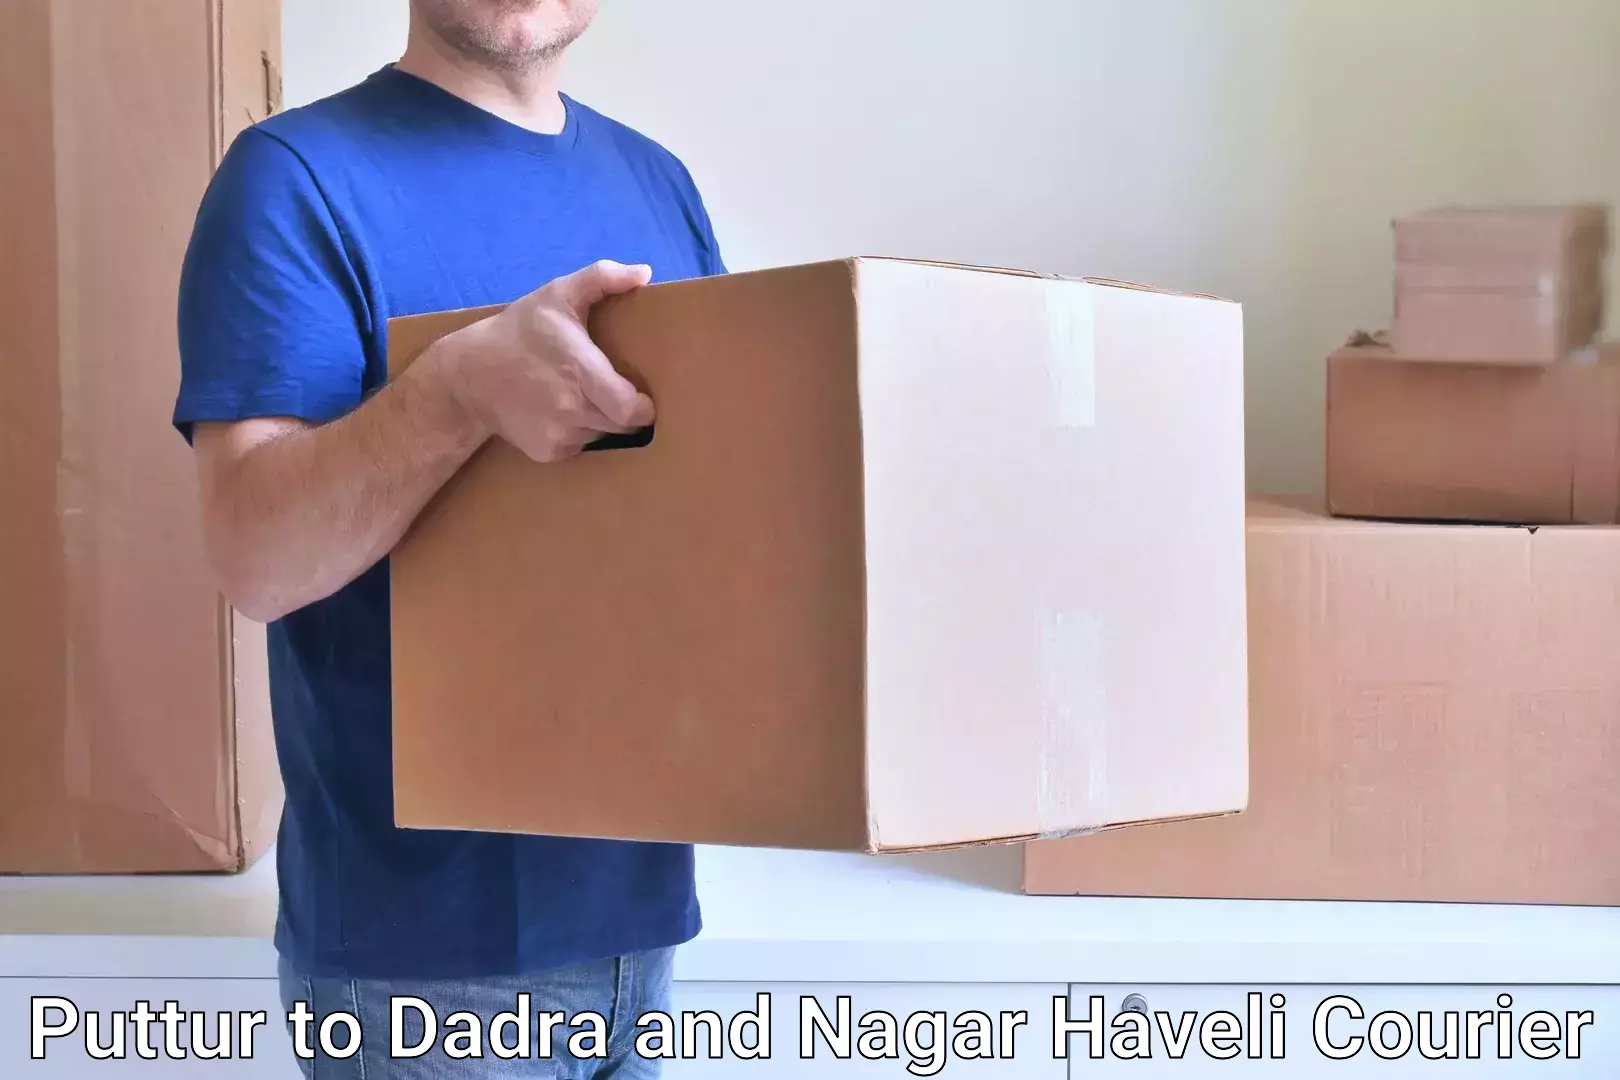 Nationwide shipping capabilities in Puttur to Dadra and Nagar Haveli